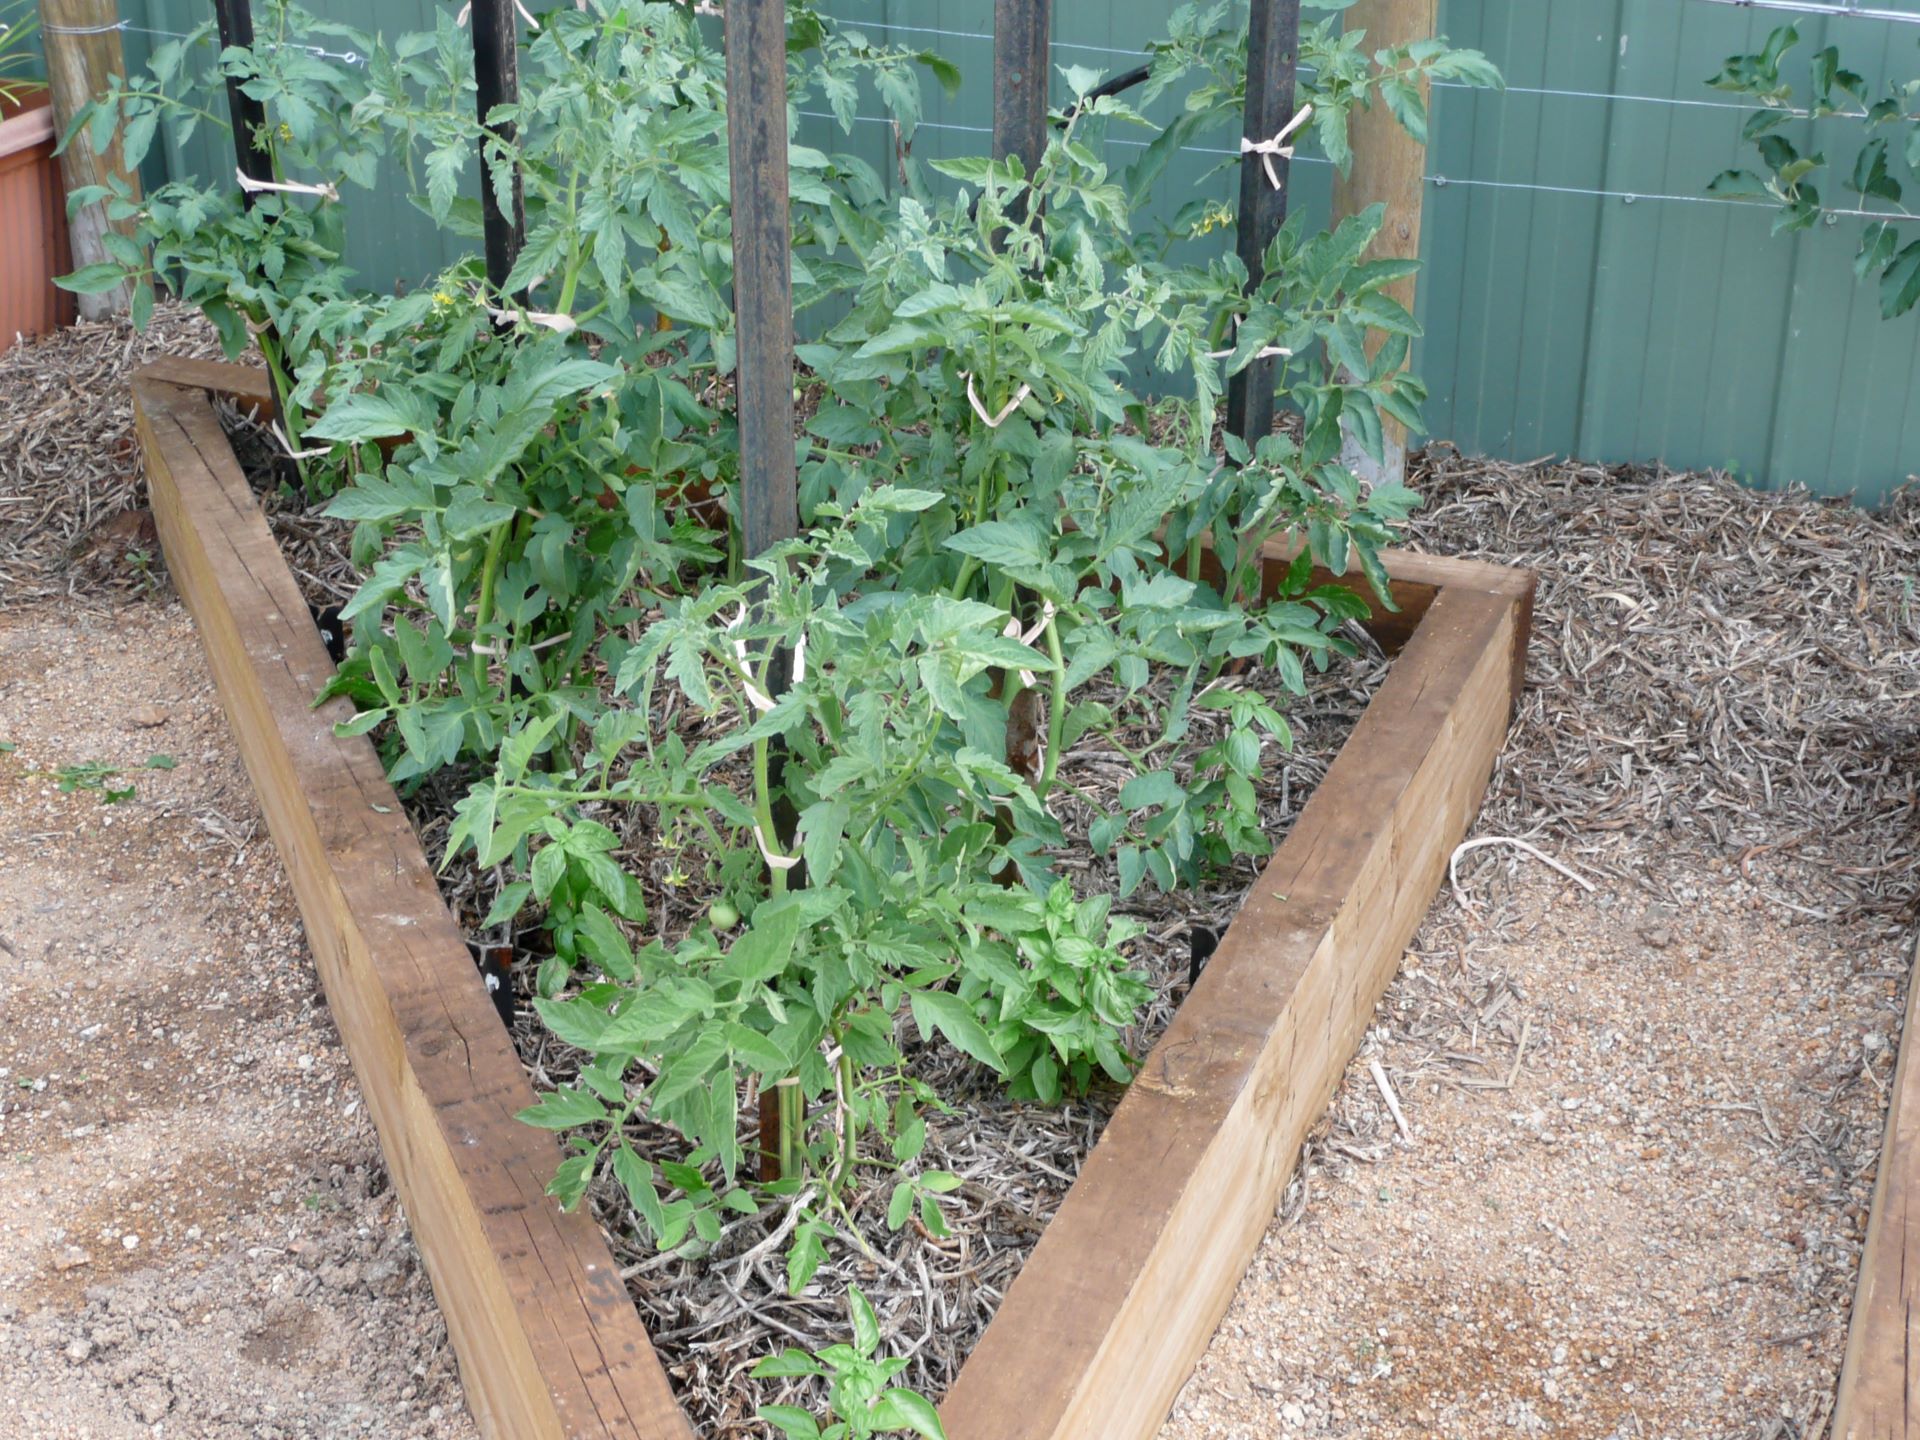 Tomato plants mulched in raised garden bed